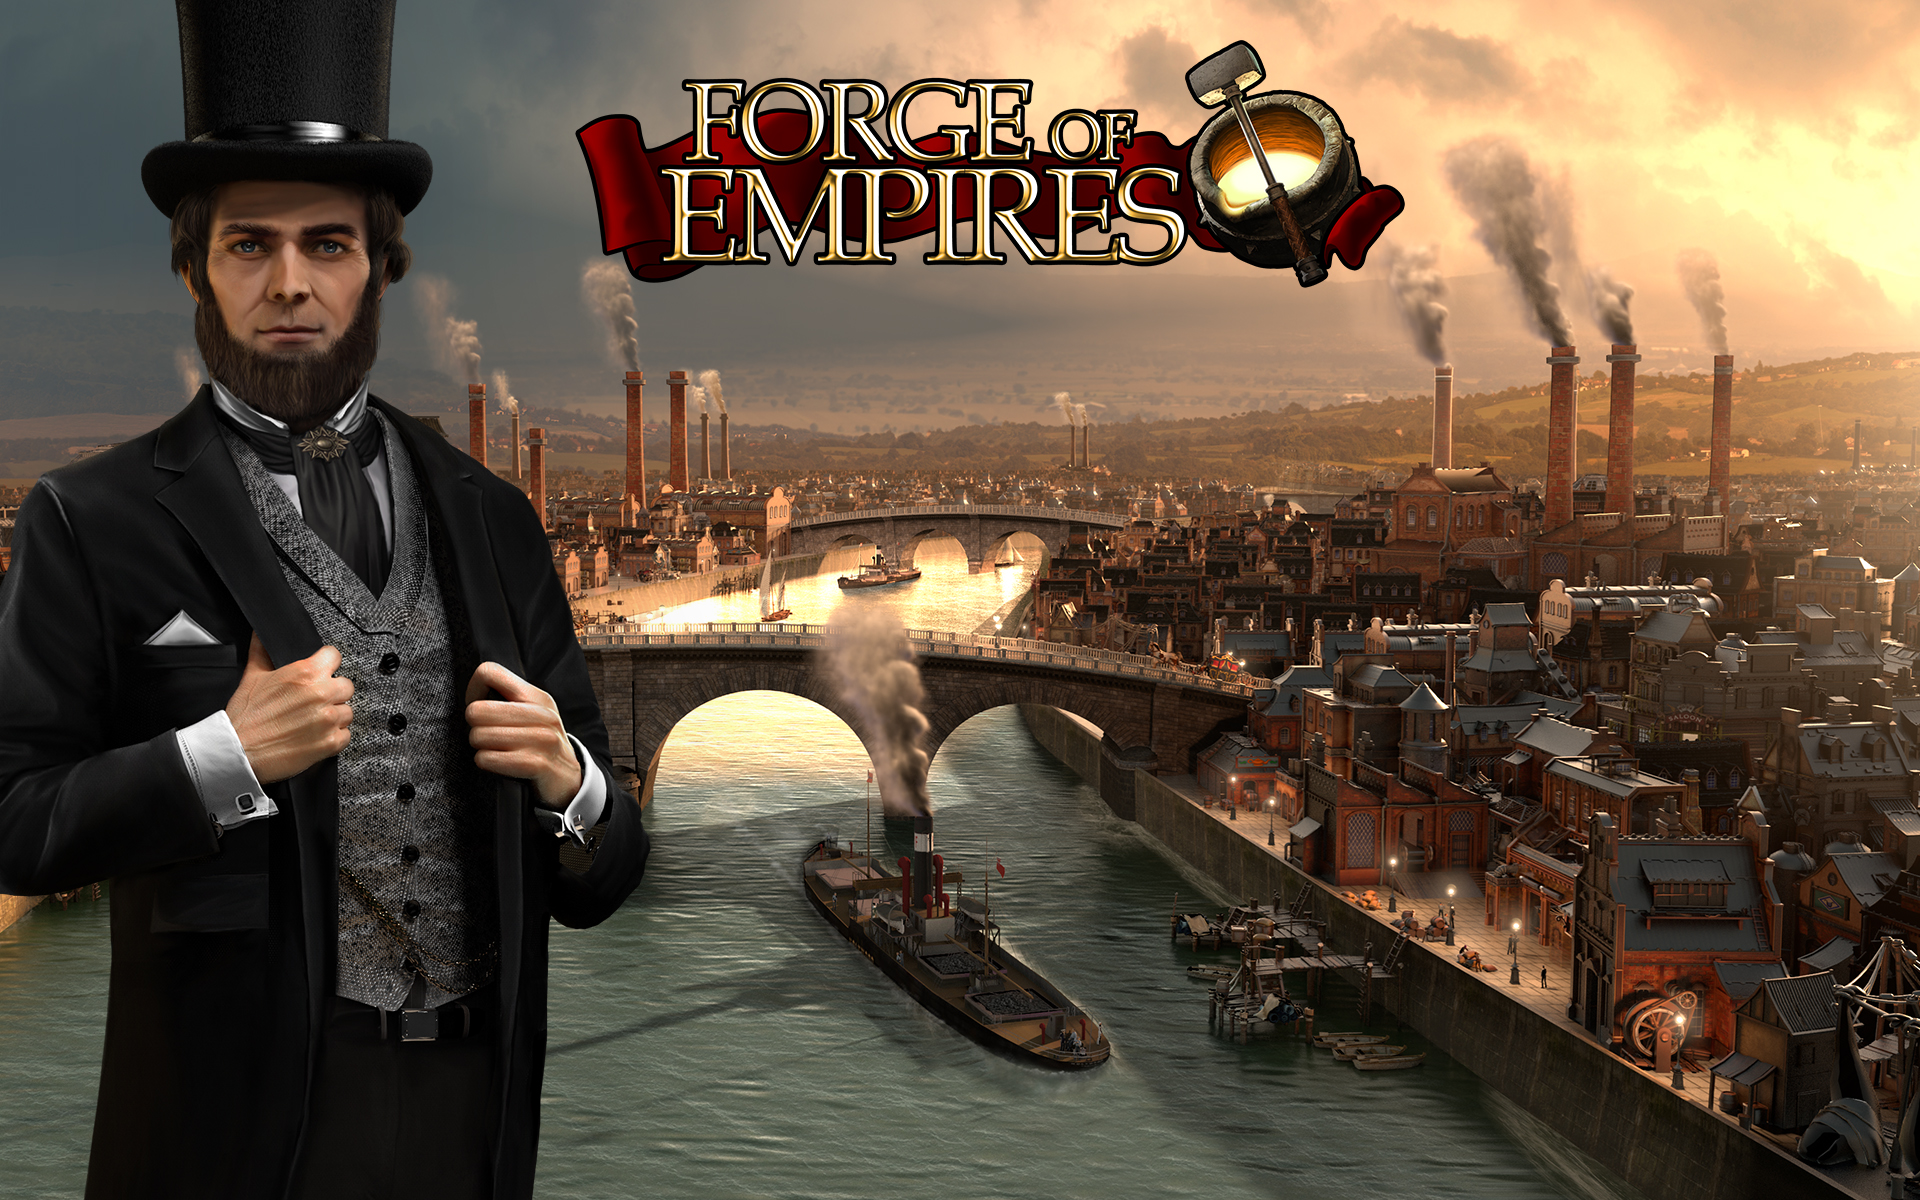 General 1920x1200 video games Forge of Empires Victorian factories cityscape men river bridge top hat steamship house smoke water video game art ship suit and tie beard city looking at viewer sky clouds